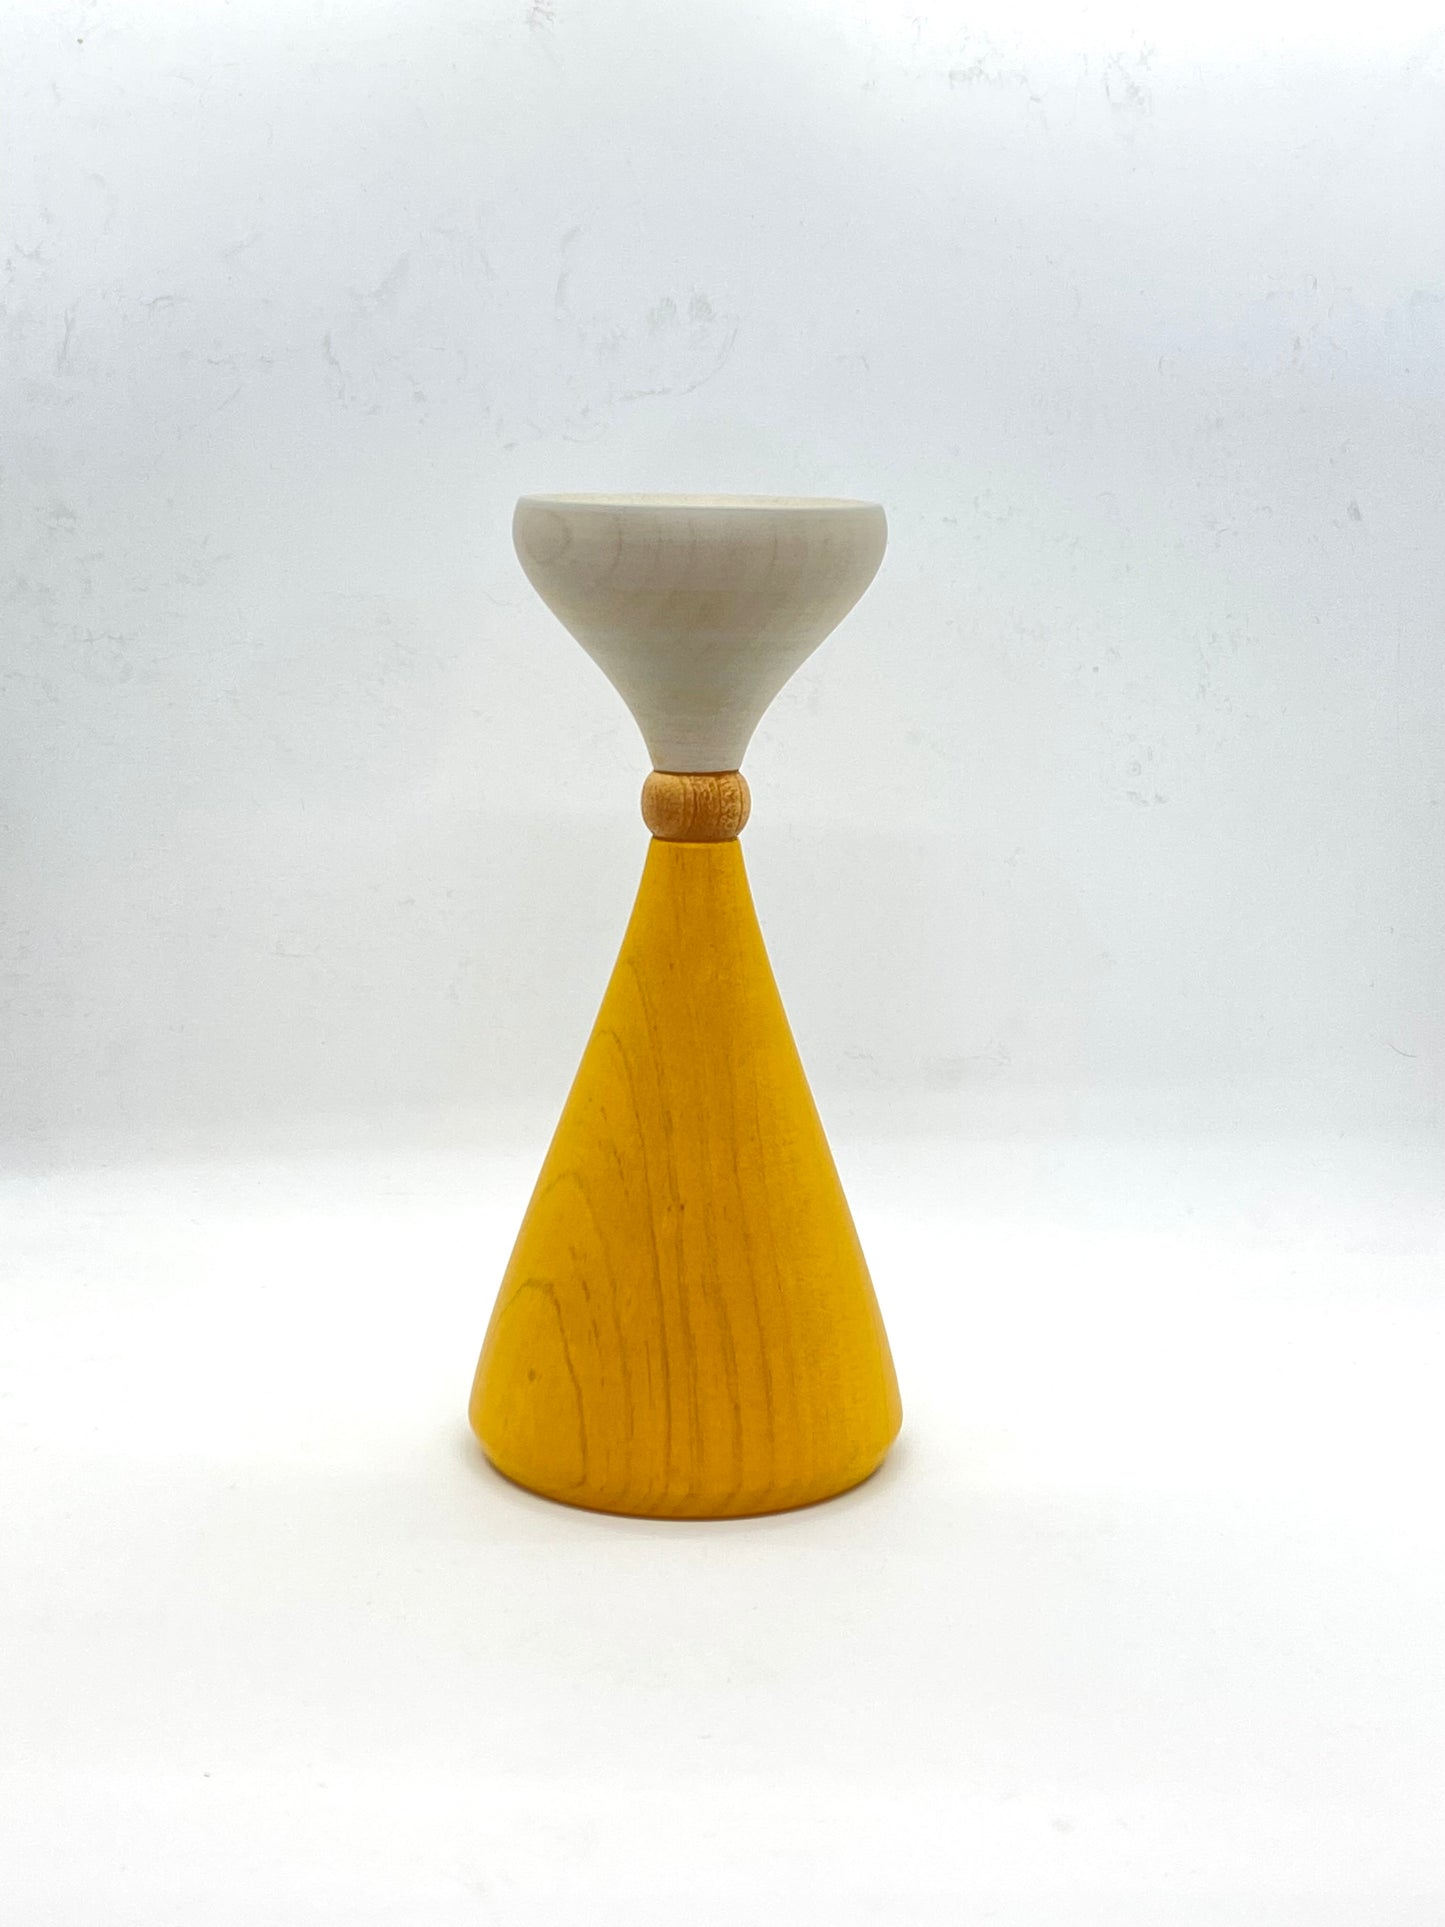 Candle Holder - Tulip Sphere - Grey/Natural/Yellow